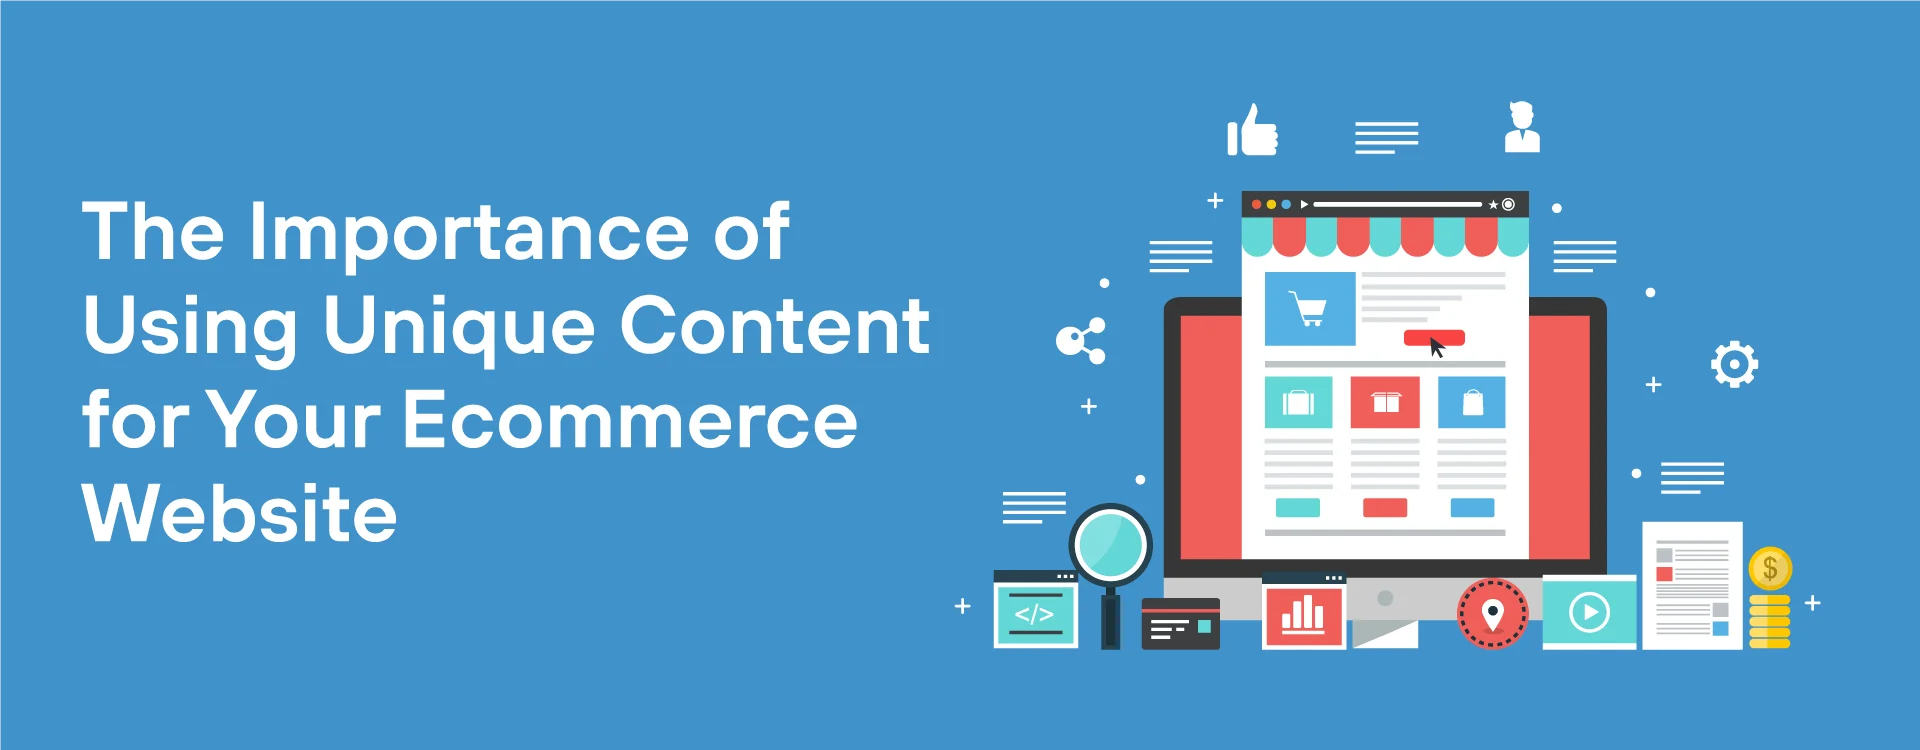 The Importance of Using Unique Content for Your Ecommerce Website